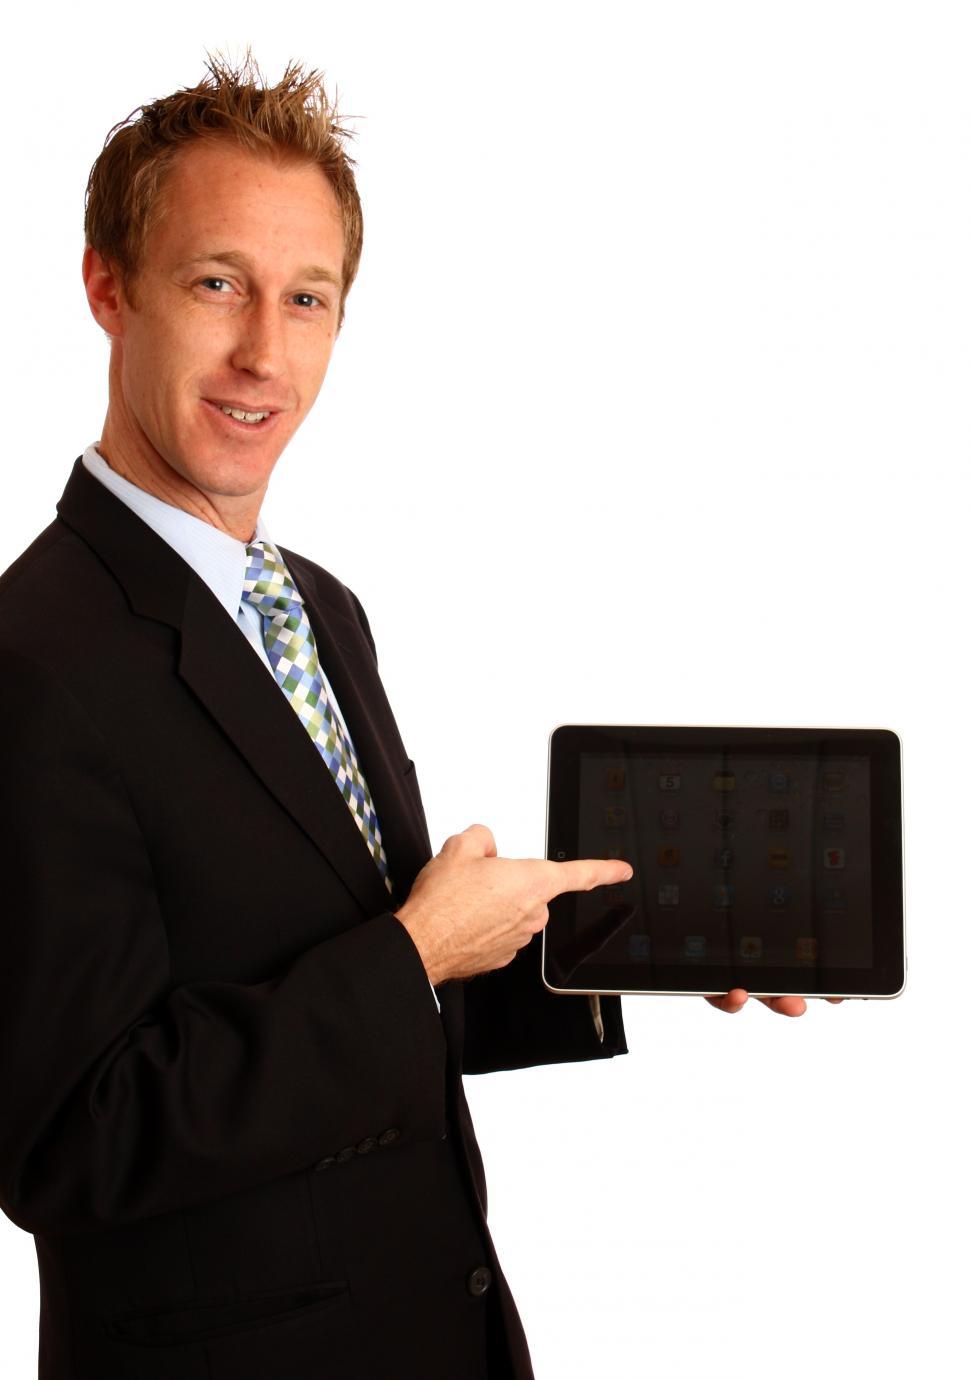 Download Free Stock Photo of A young businessman holding a tablet computer 